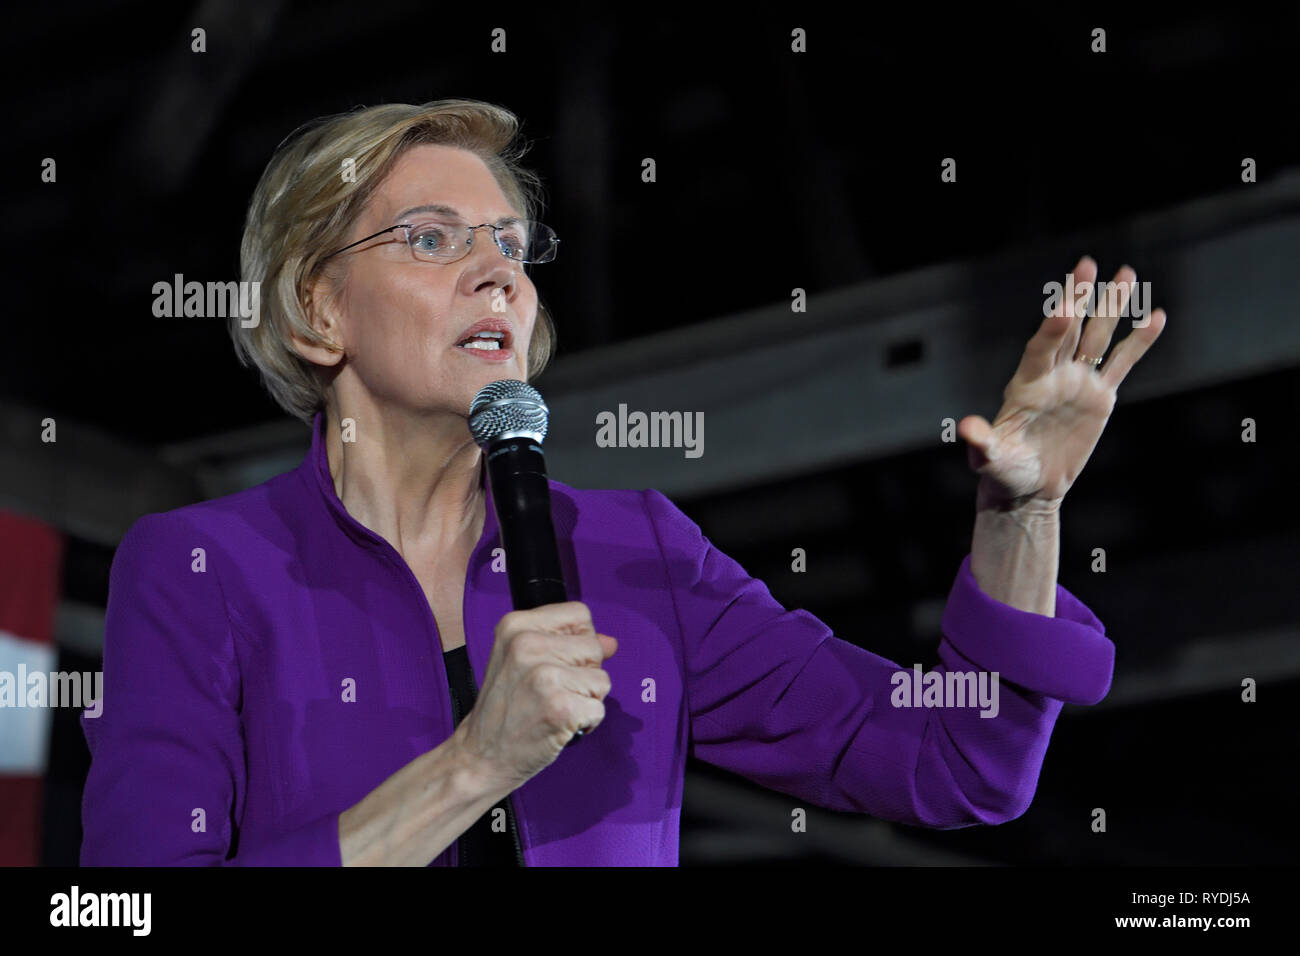 New York, NY - March 08: Senator Elizabeth Warren (D-Mass) speaks during a campaign rally in Long Island City, Queens on March 8, 2019 in New York Cit Stock Photo